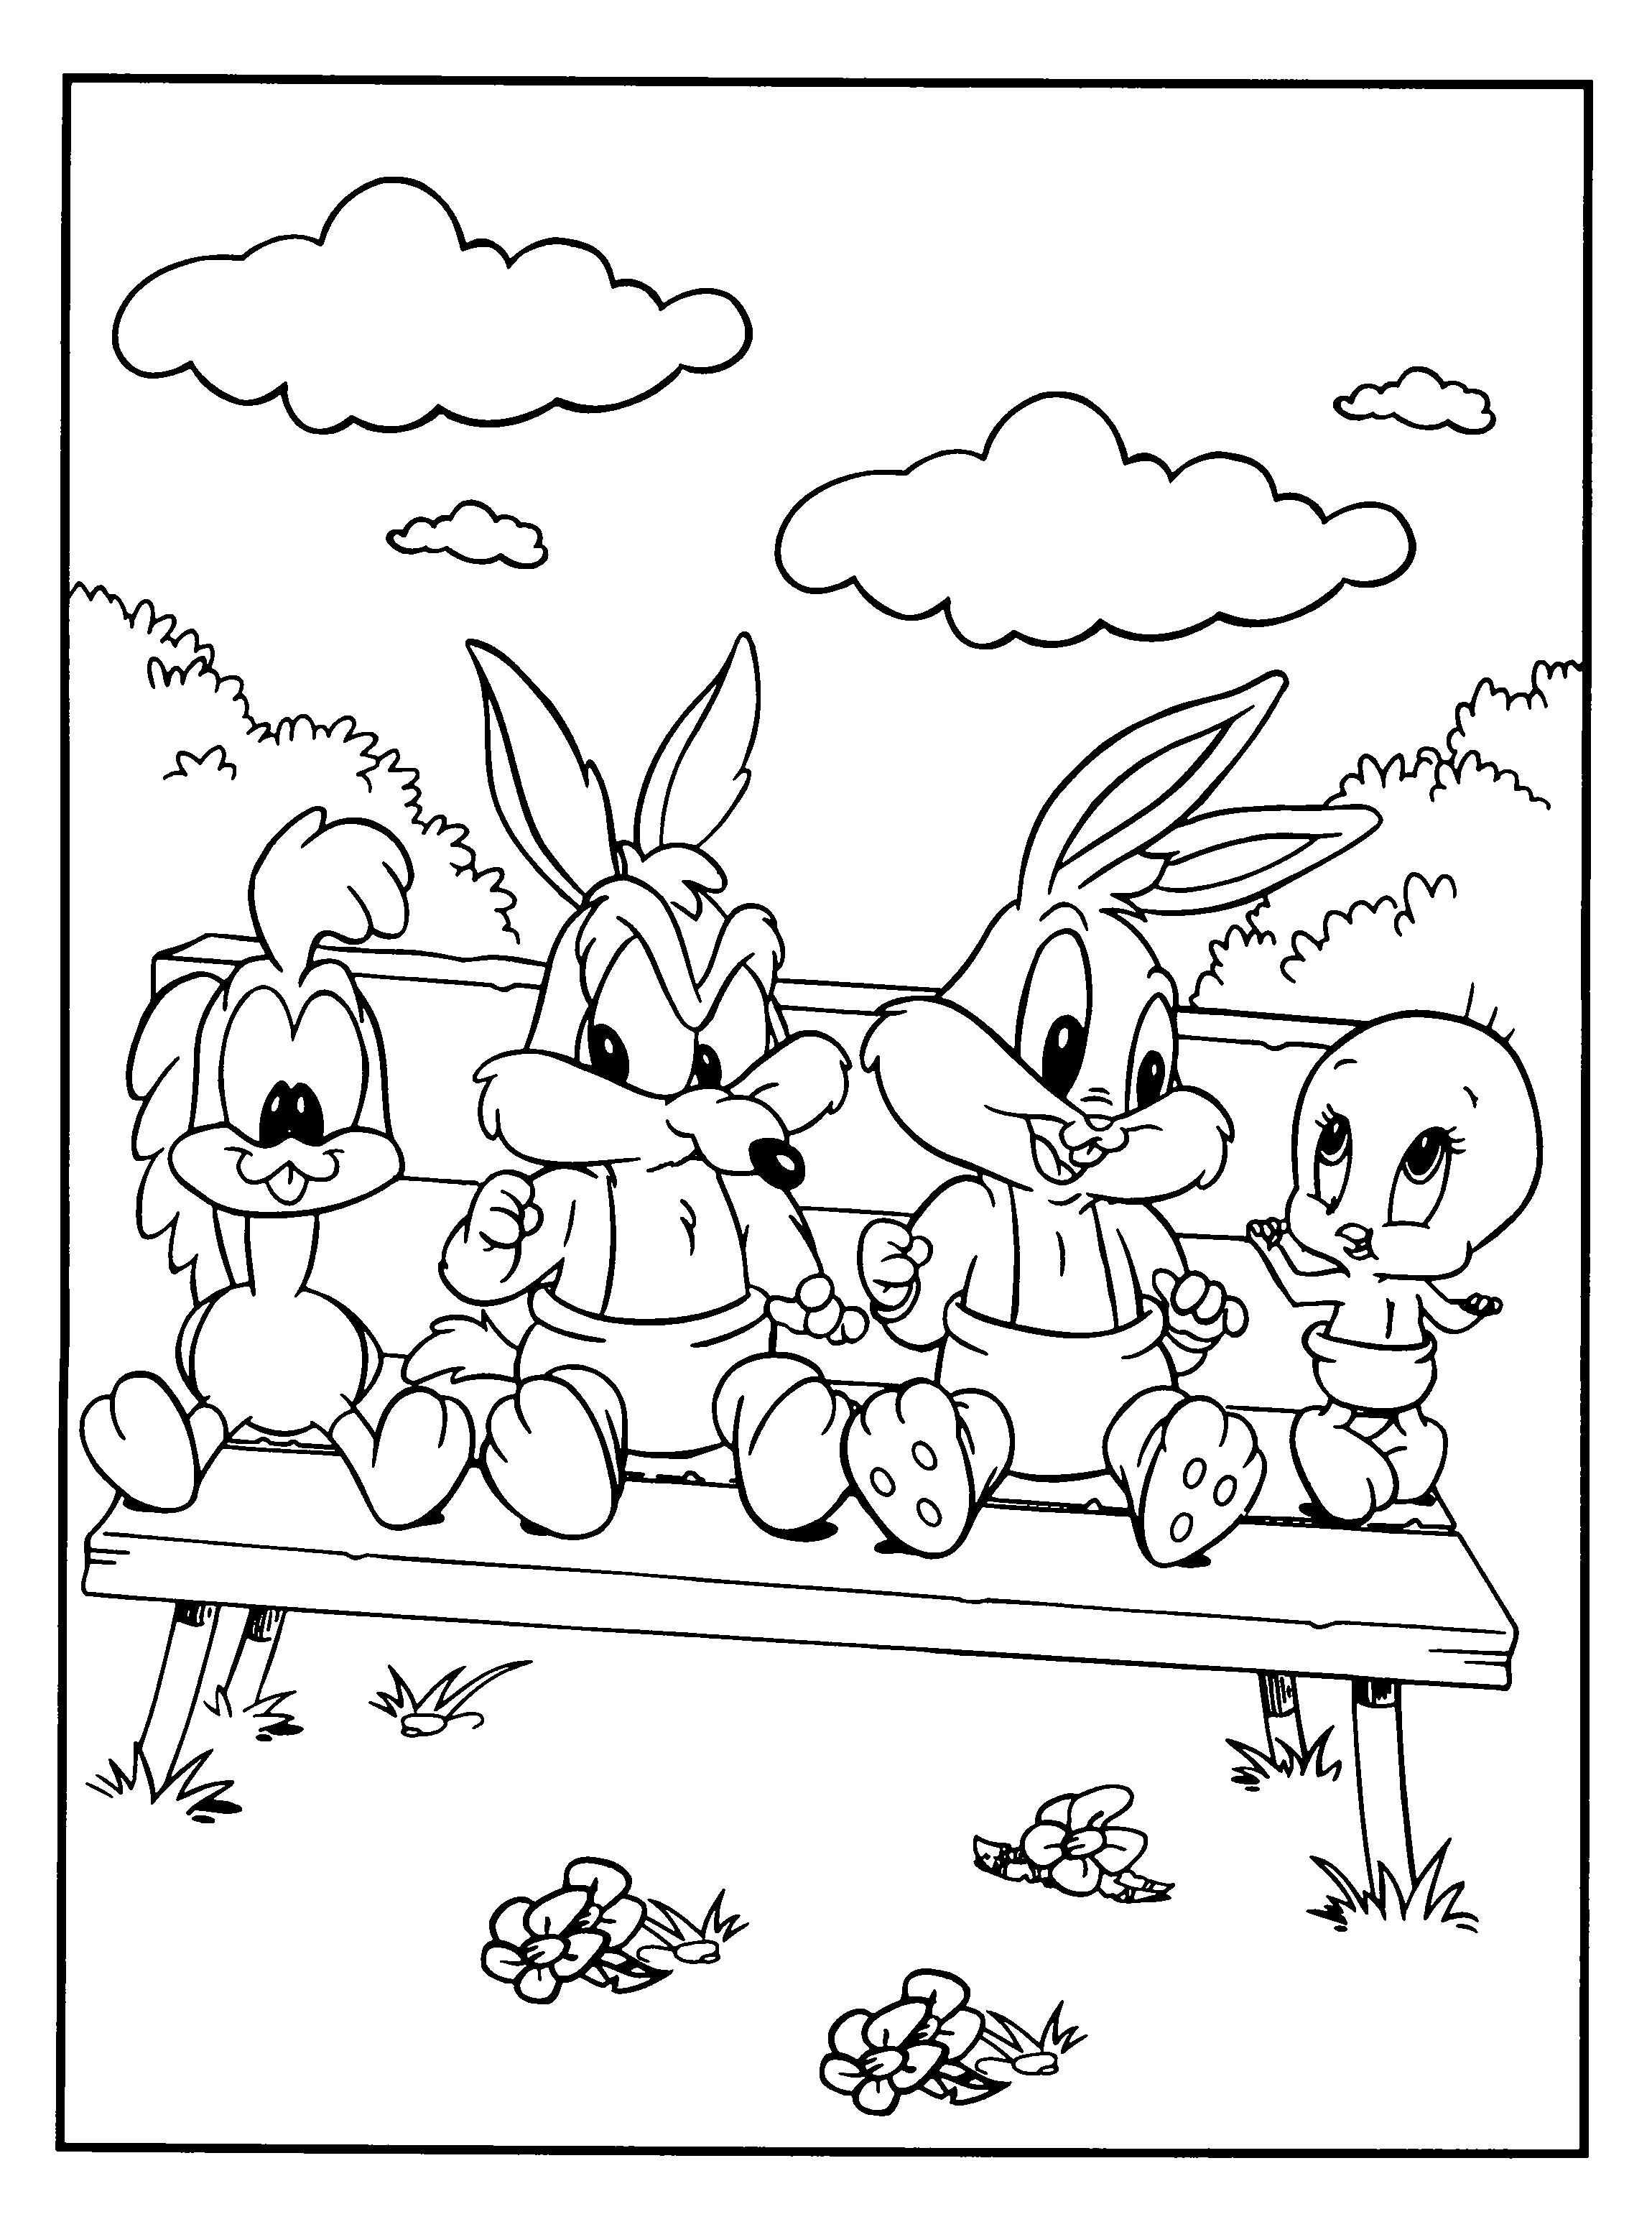 Looney tunes coloring pages